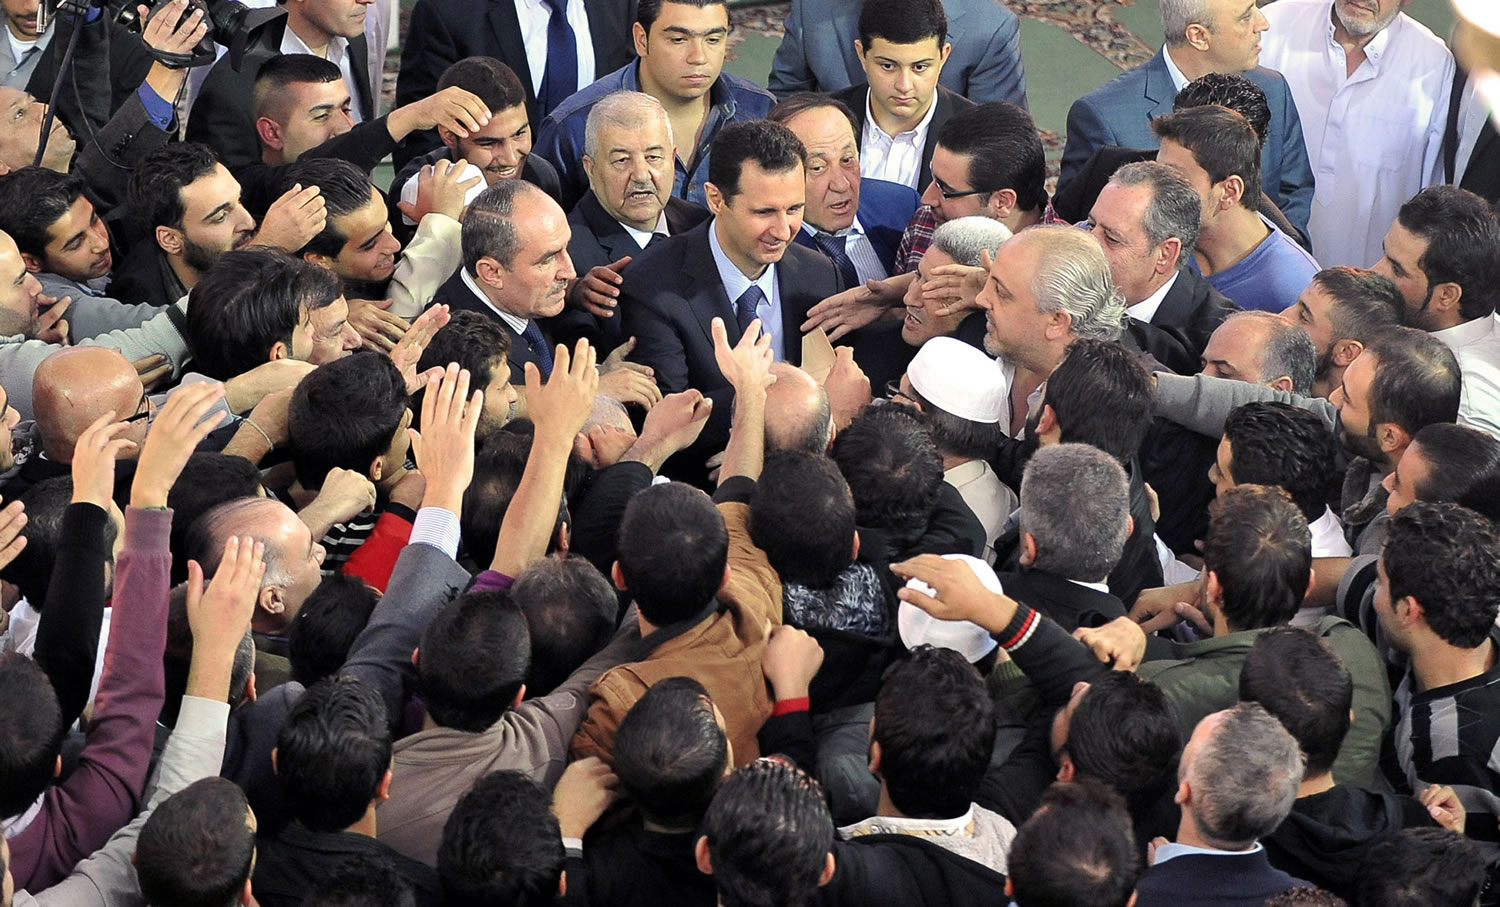 Syrian President Bashar Assad, center, greets his supporters after he attended prayers on the first day of Eid al-Adha, at the Sayeda Hassiba mosque, in Damascus, Syria, on Tuesday.